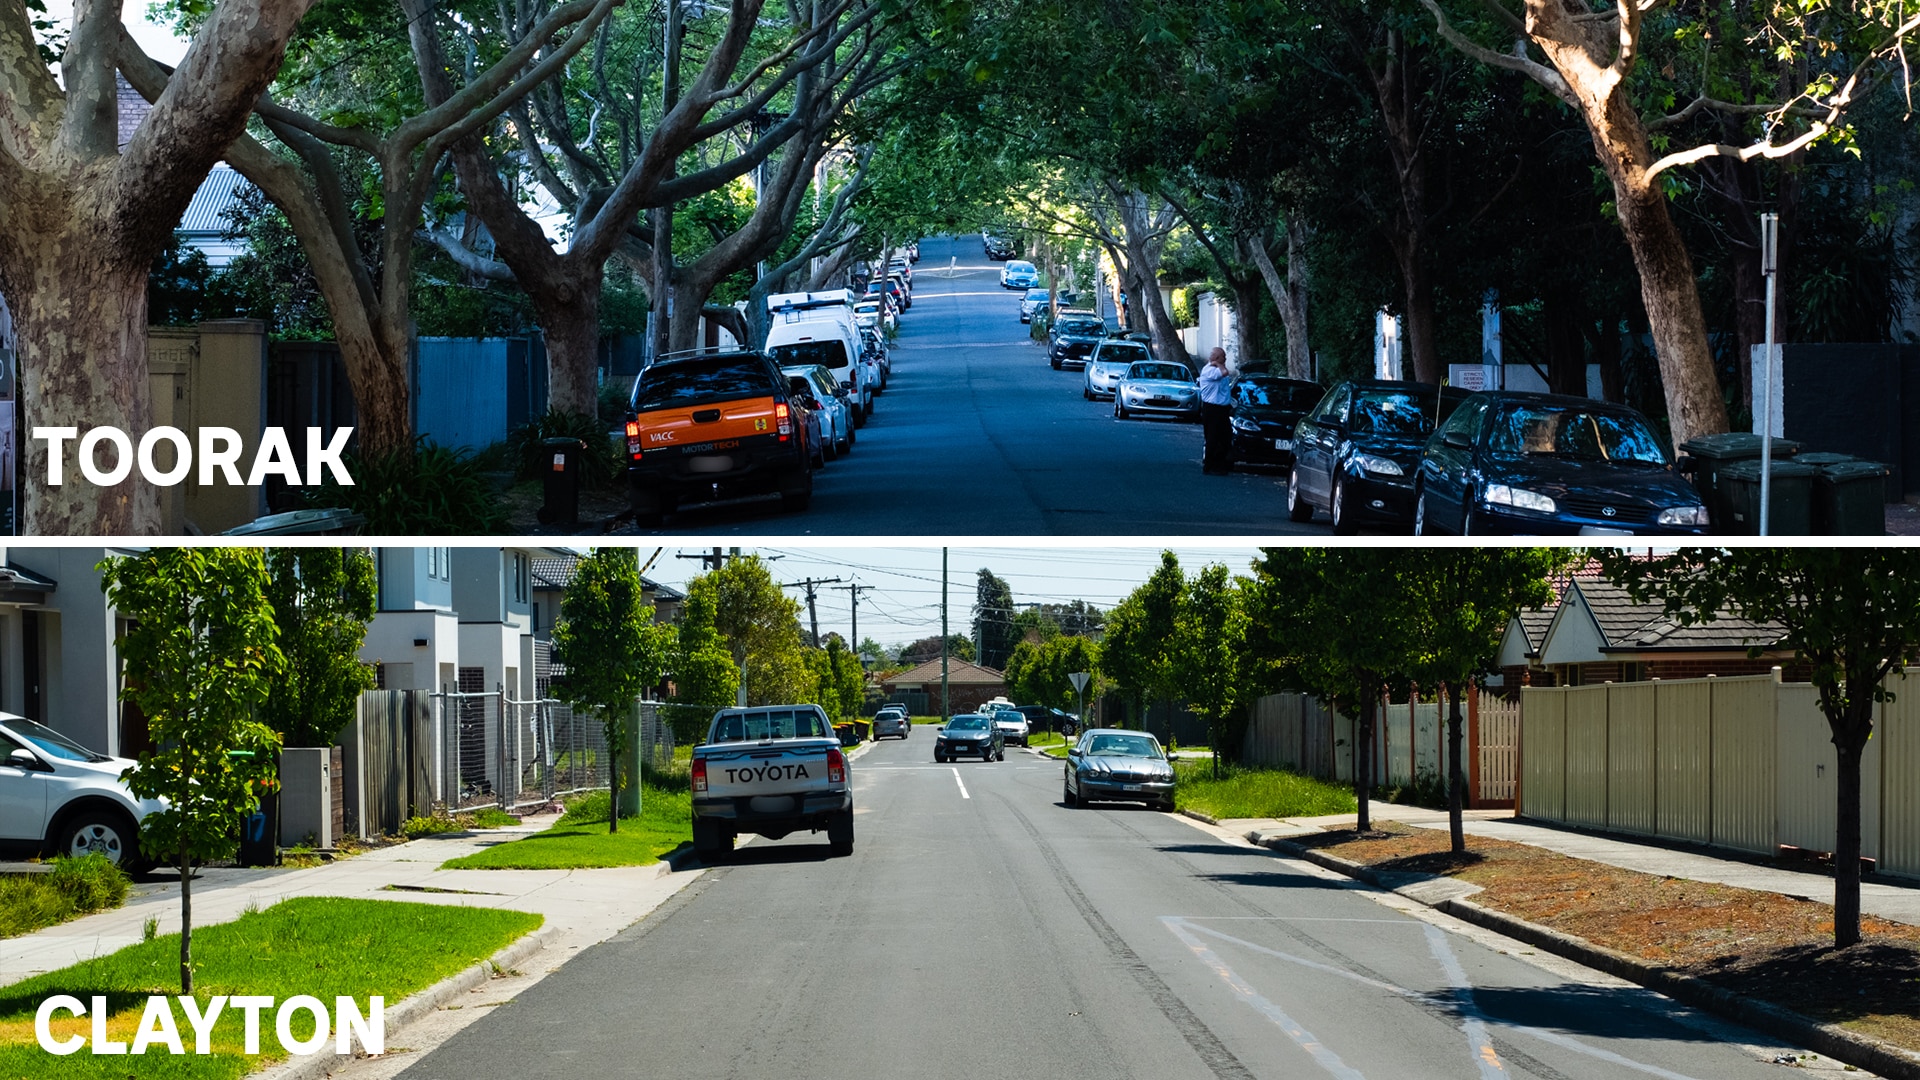 A leafy shady street on top in Toorak and a sunny street with fewer trees in Clayton.